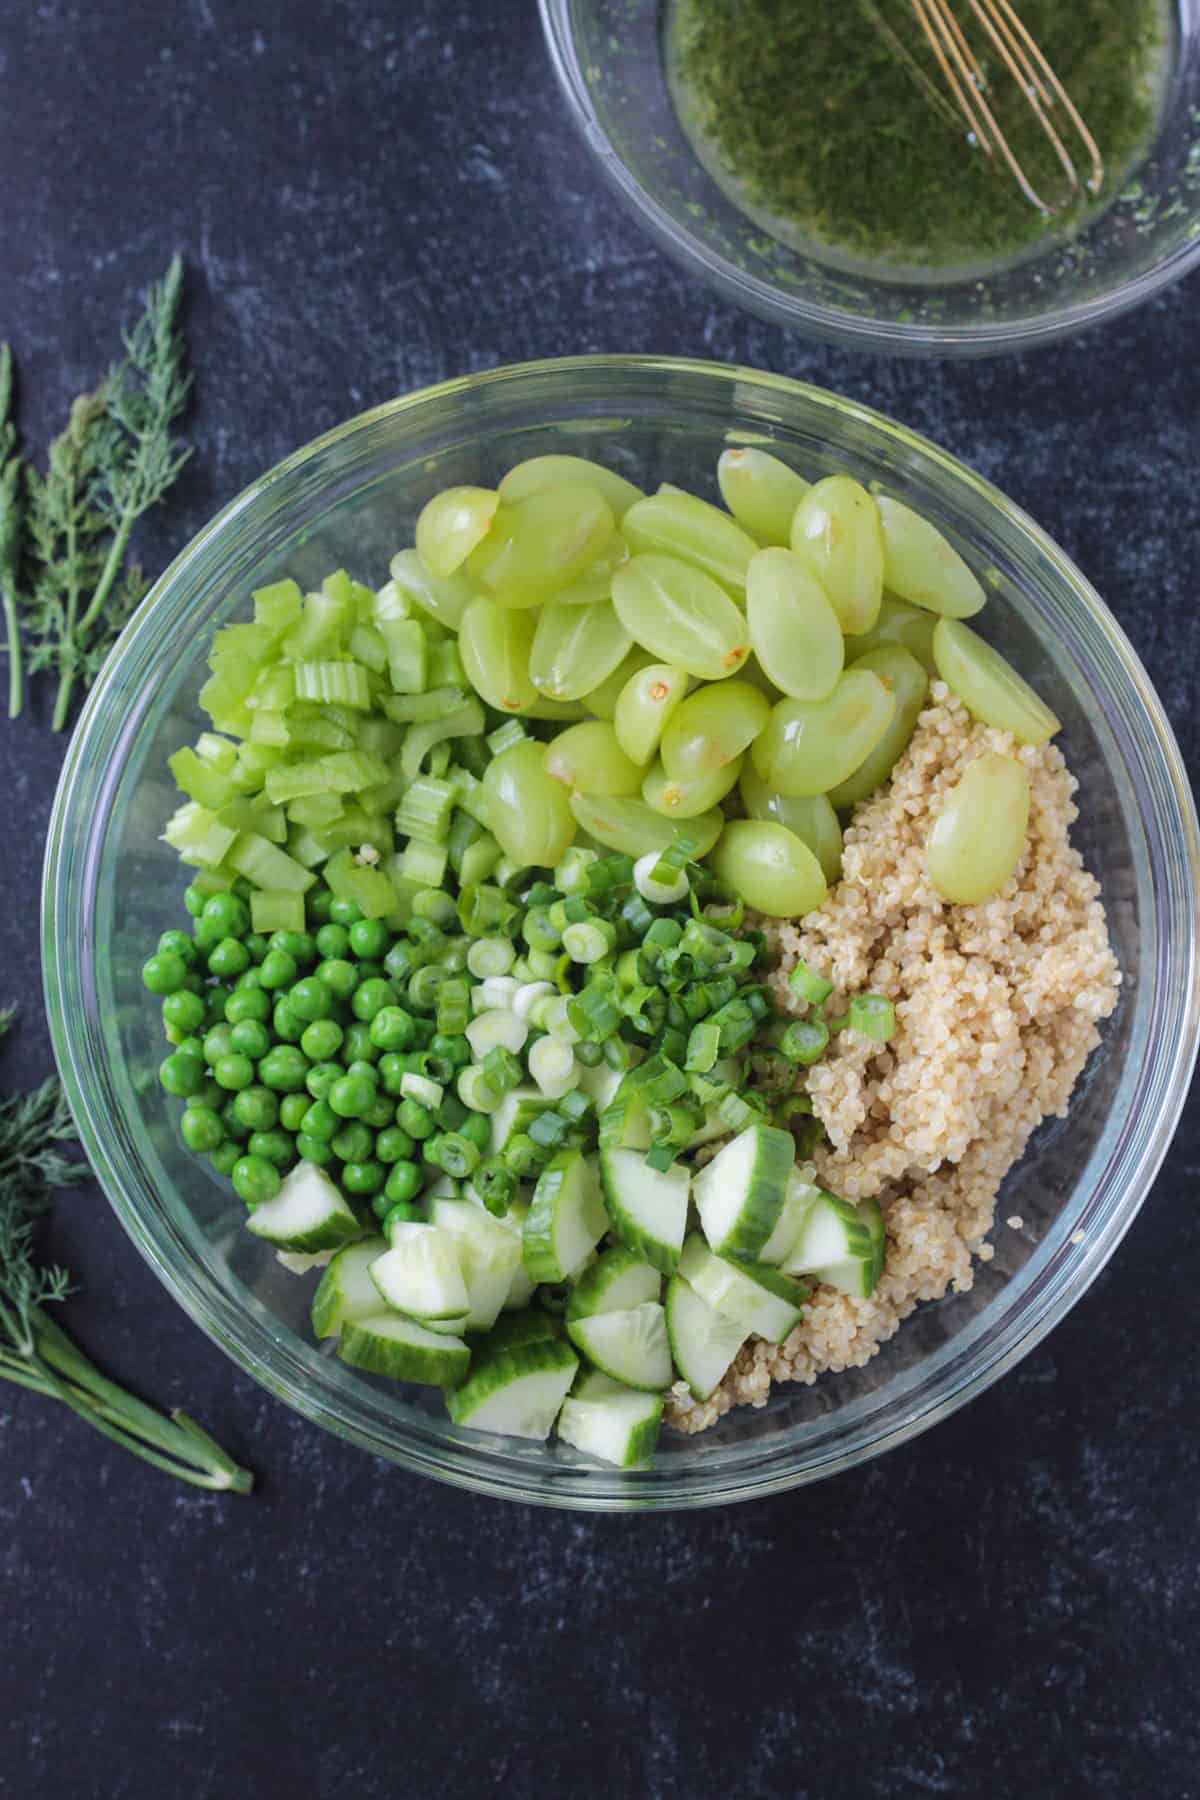 Quinoa, grapes, celery, peas, green onions, and cucumbers in a bowl.